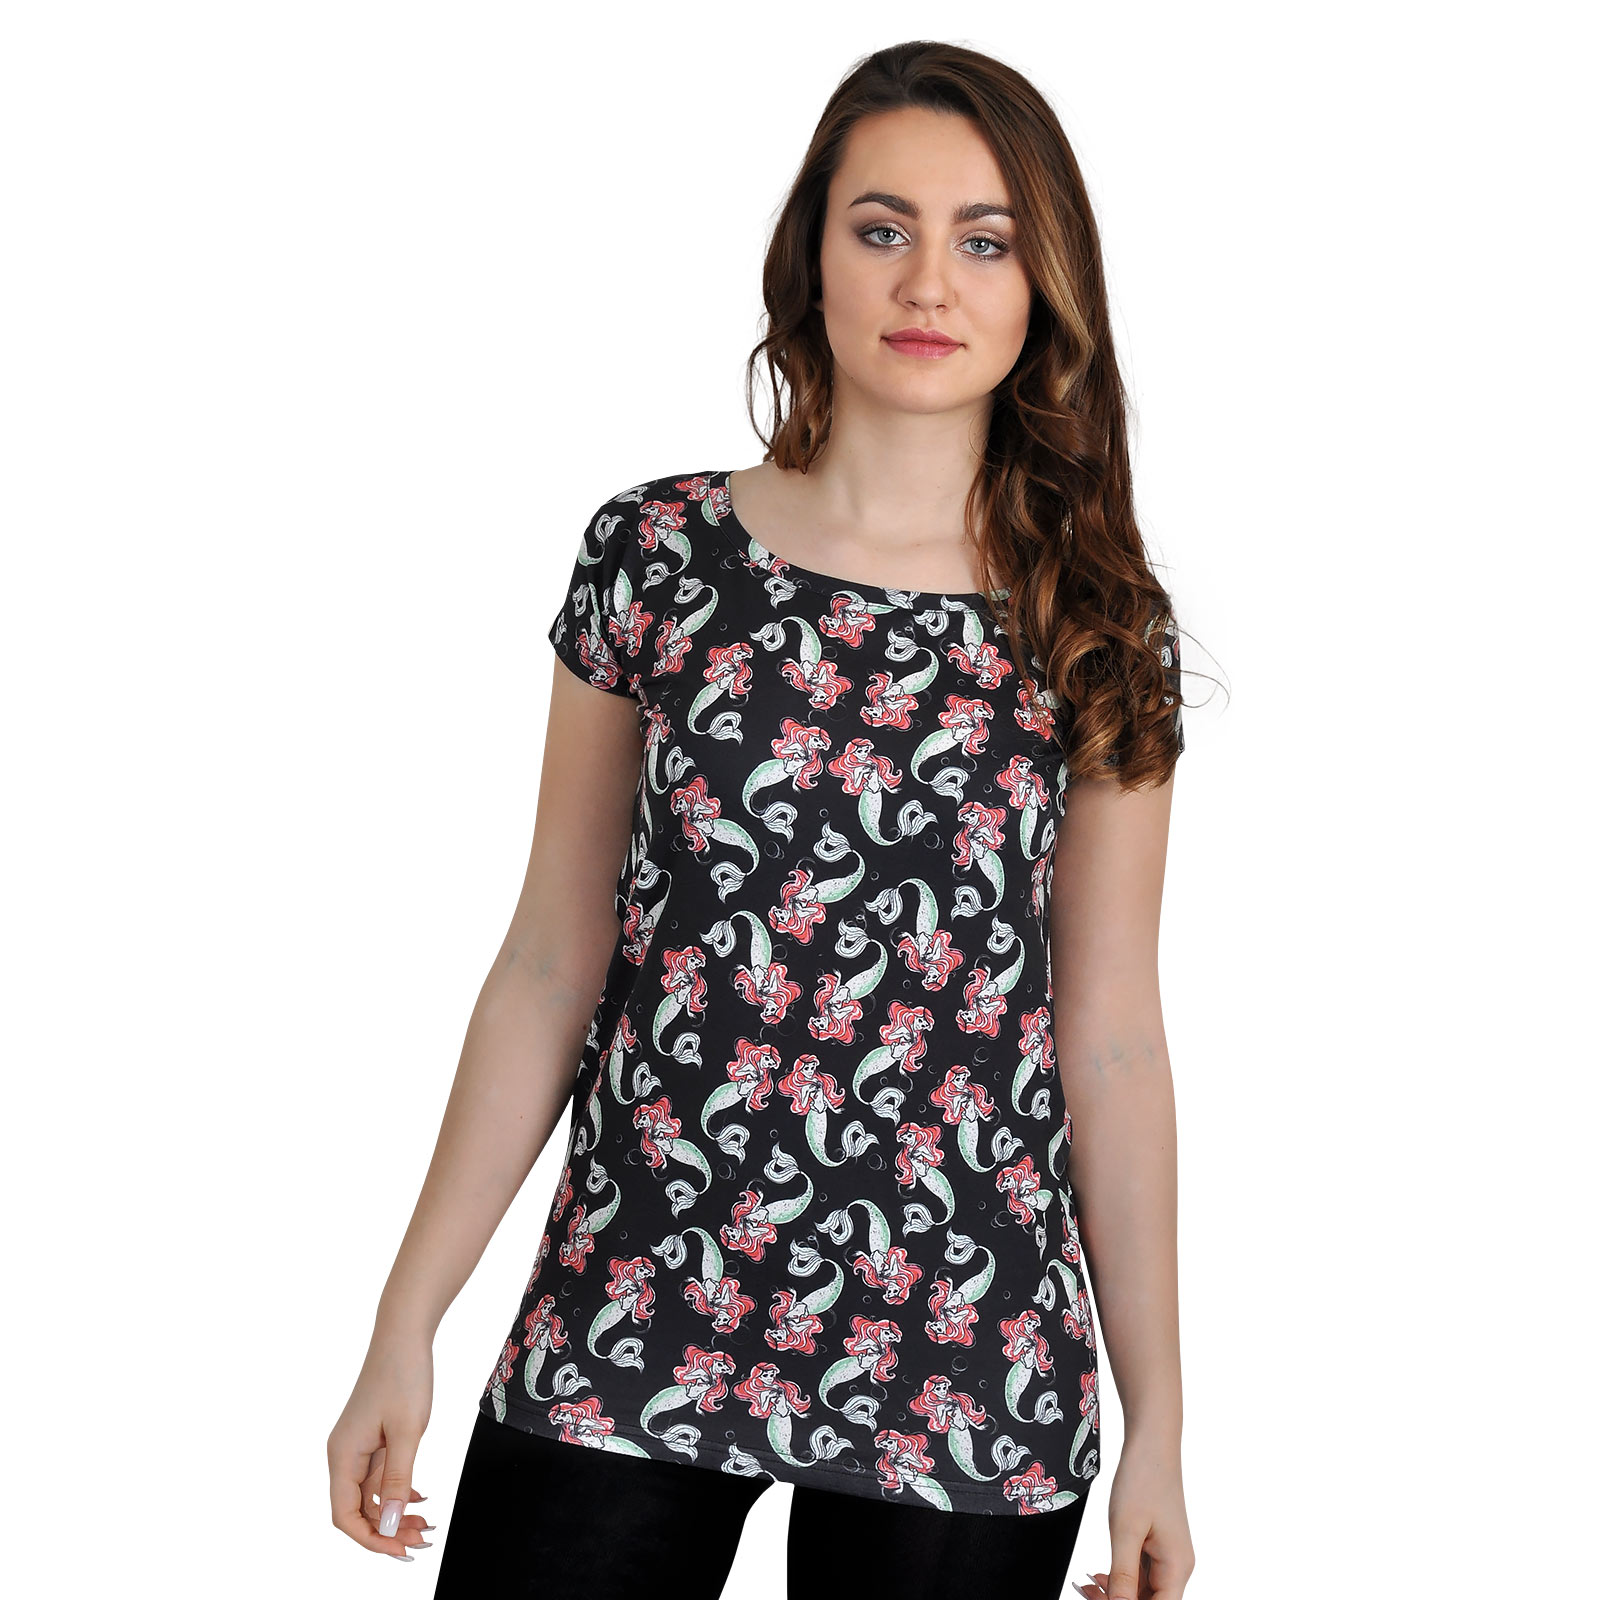 Arielle - Allover Girlie Shirt Loose Fit